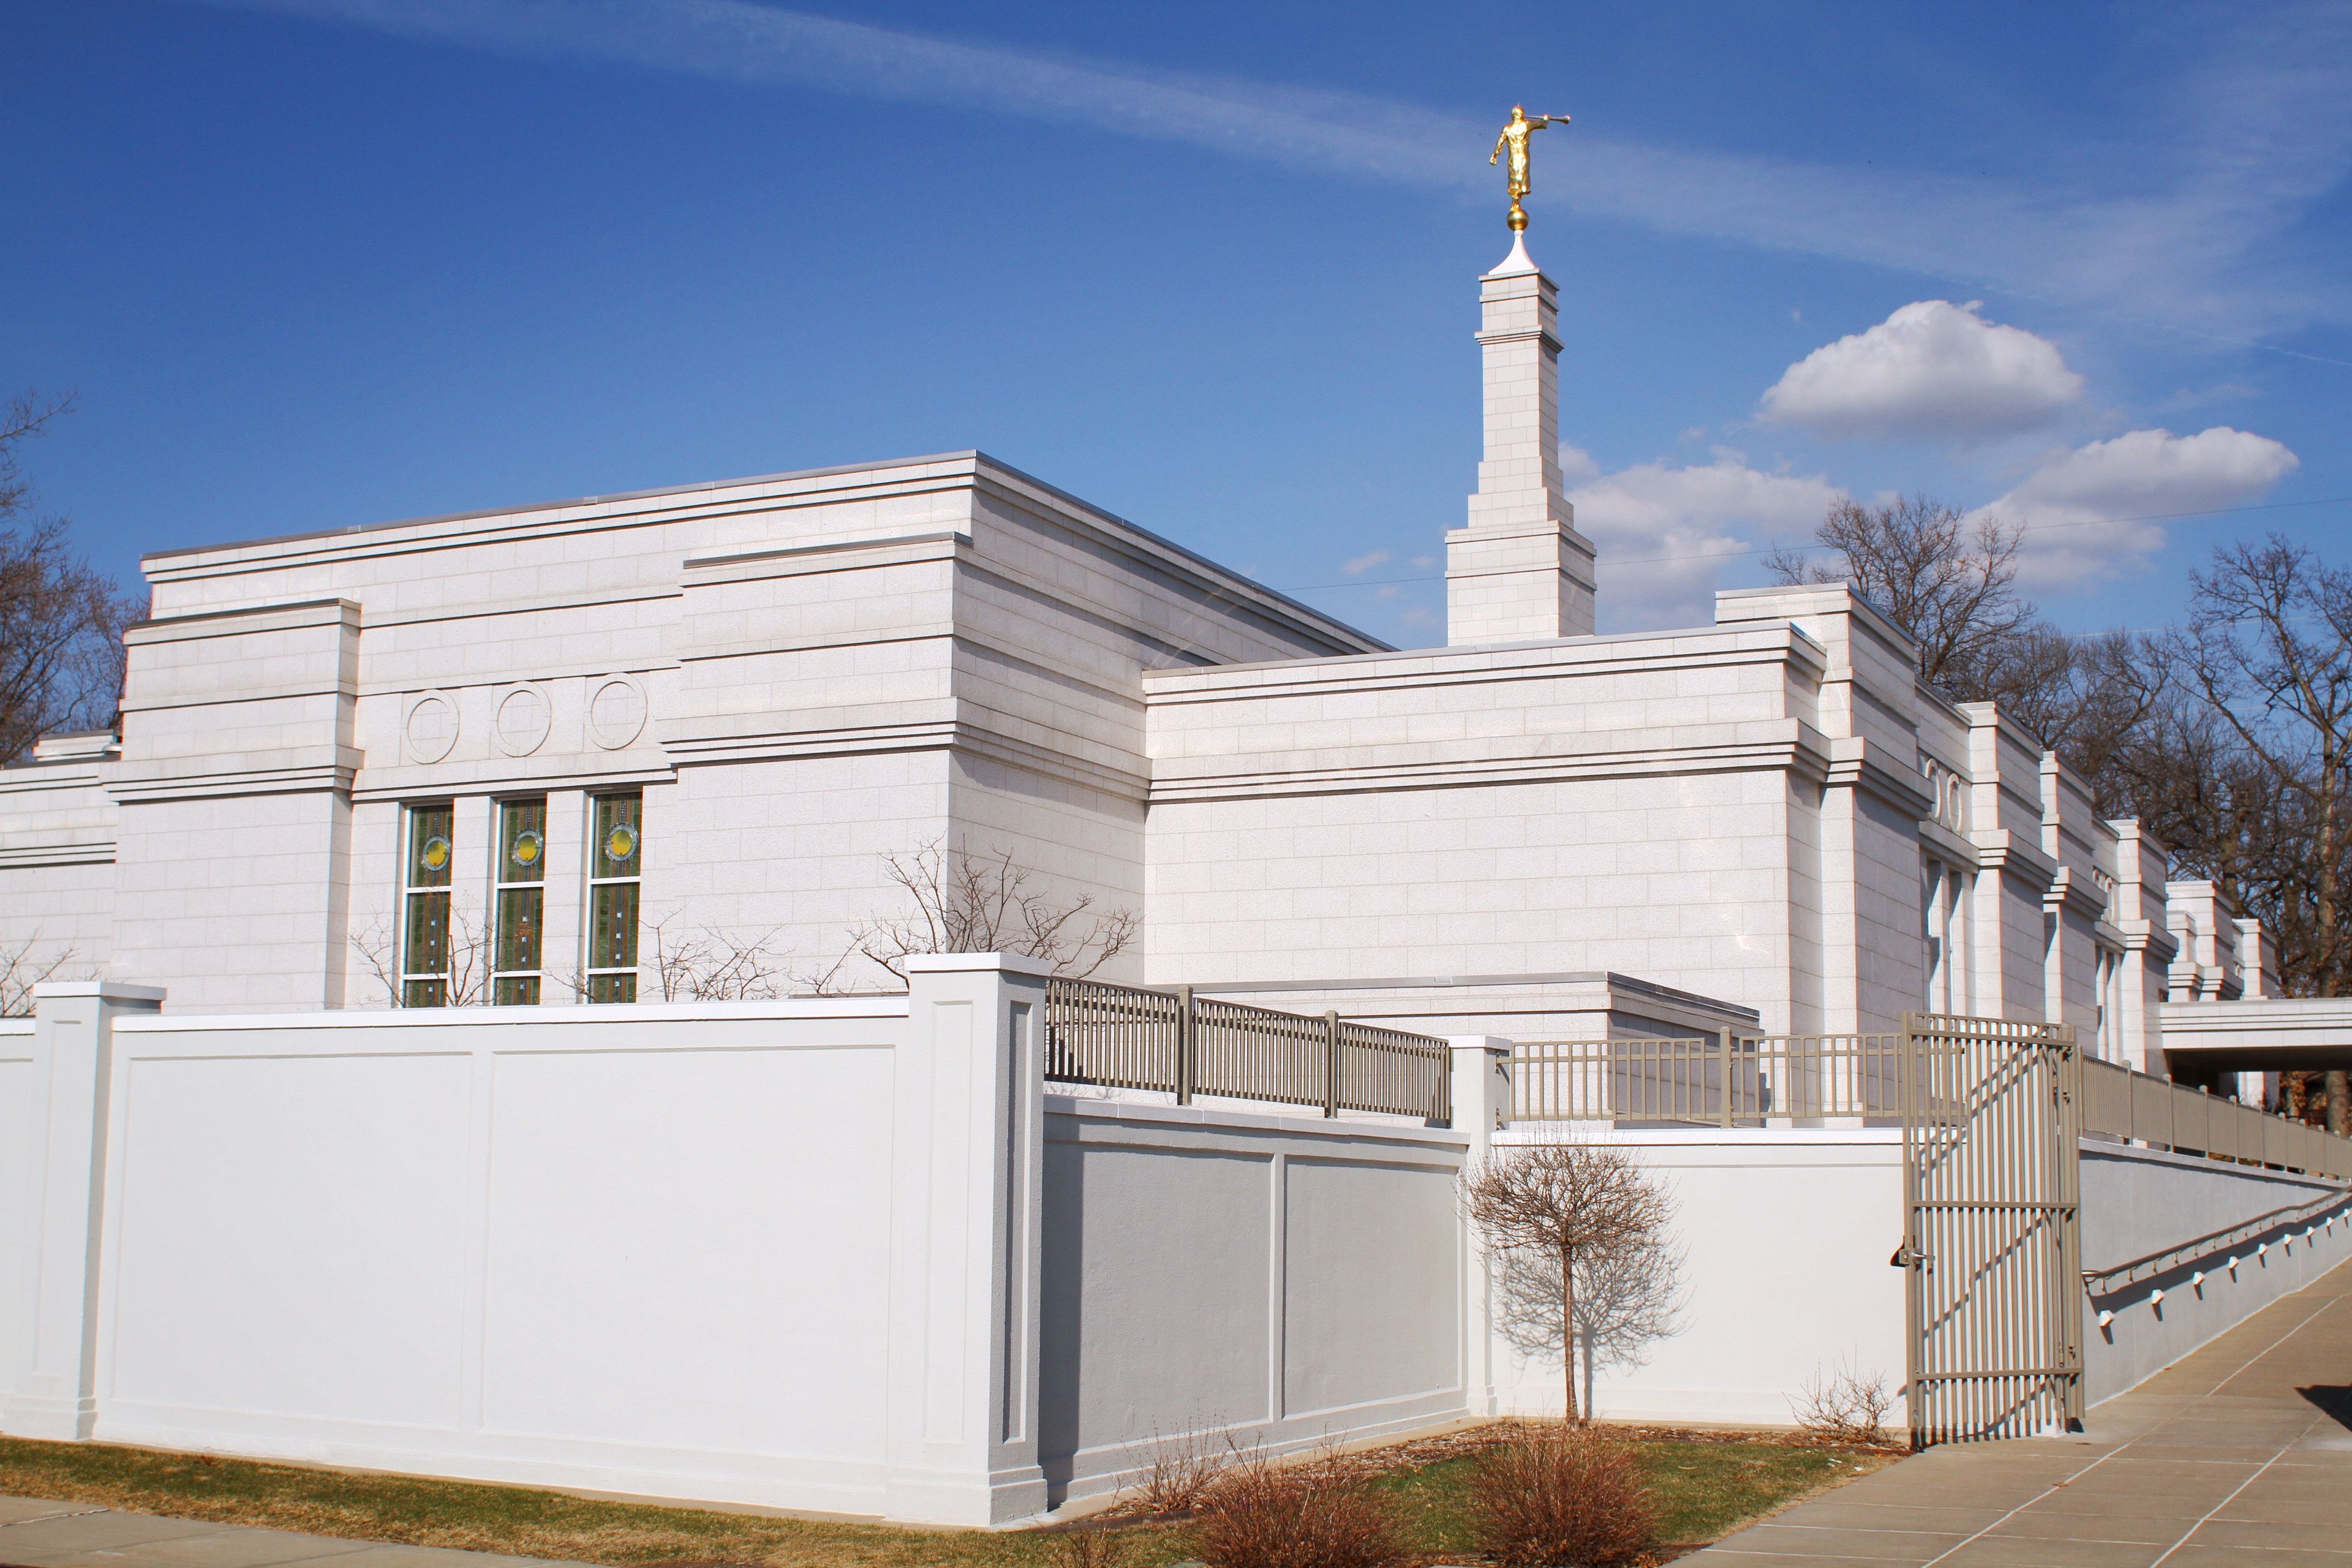 The St. Paul Minnesota Temple west side, including the windows, spire, and entrance.